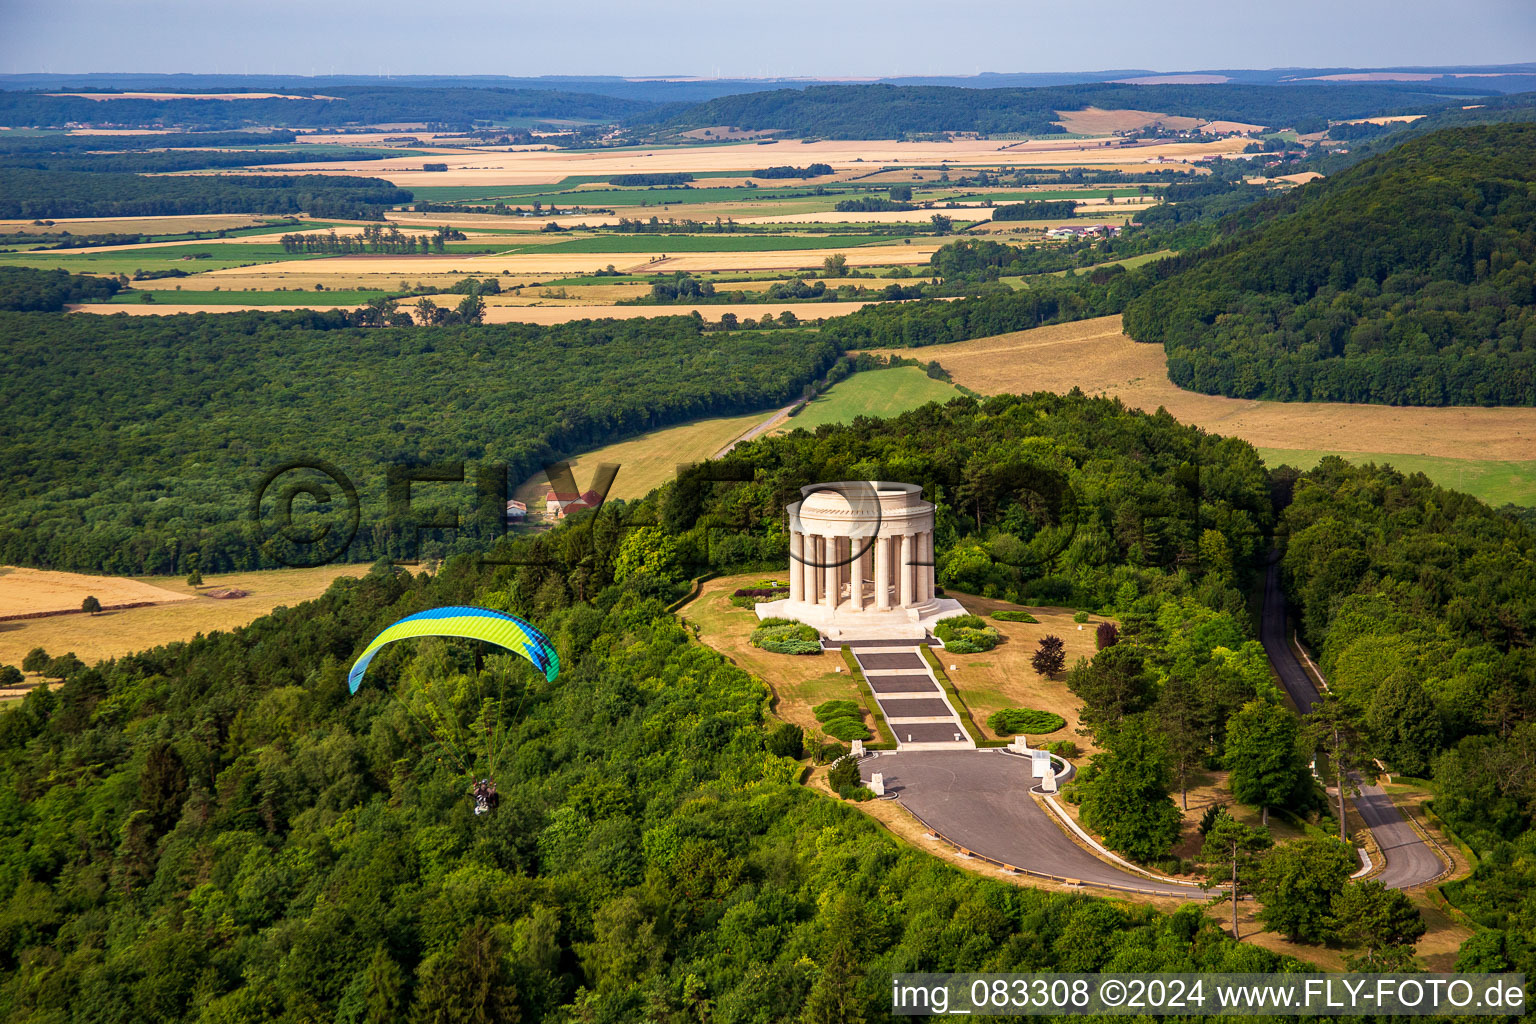 Tourist attraction of the historic monument Butte de Montsec of the American battle monuments commission in Montsec in Alsace-Champagne-Ardenne-Lorraine, France